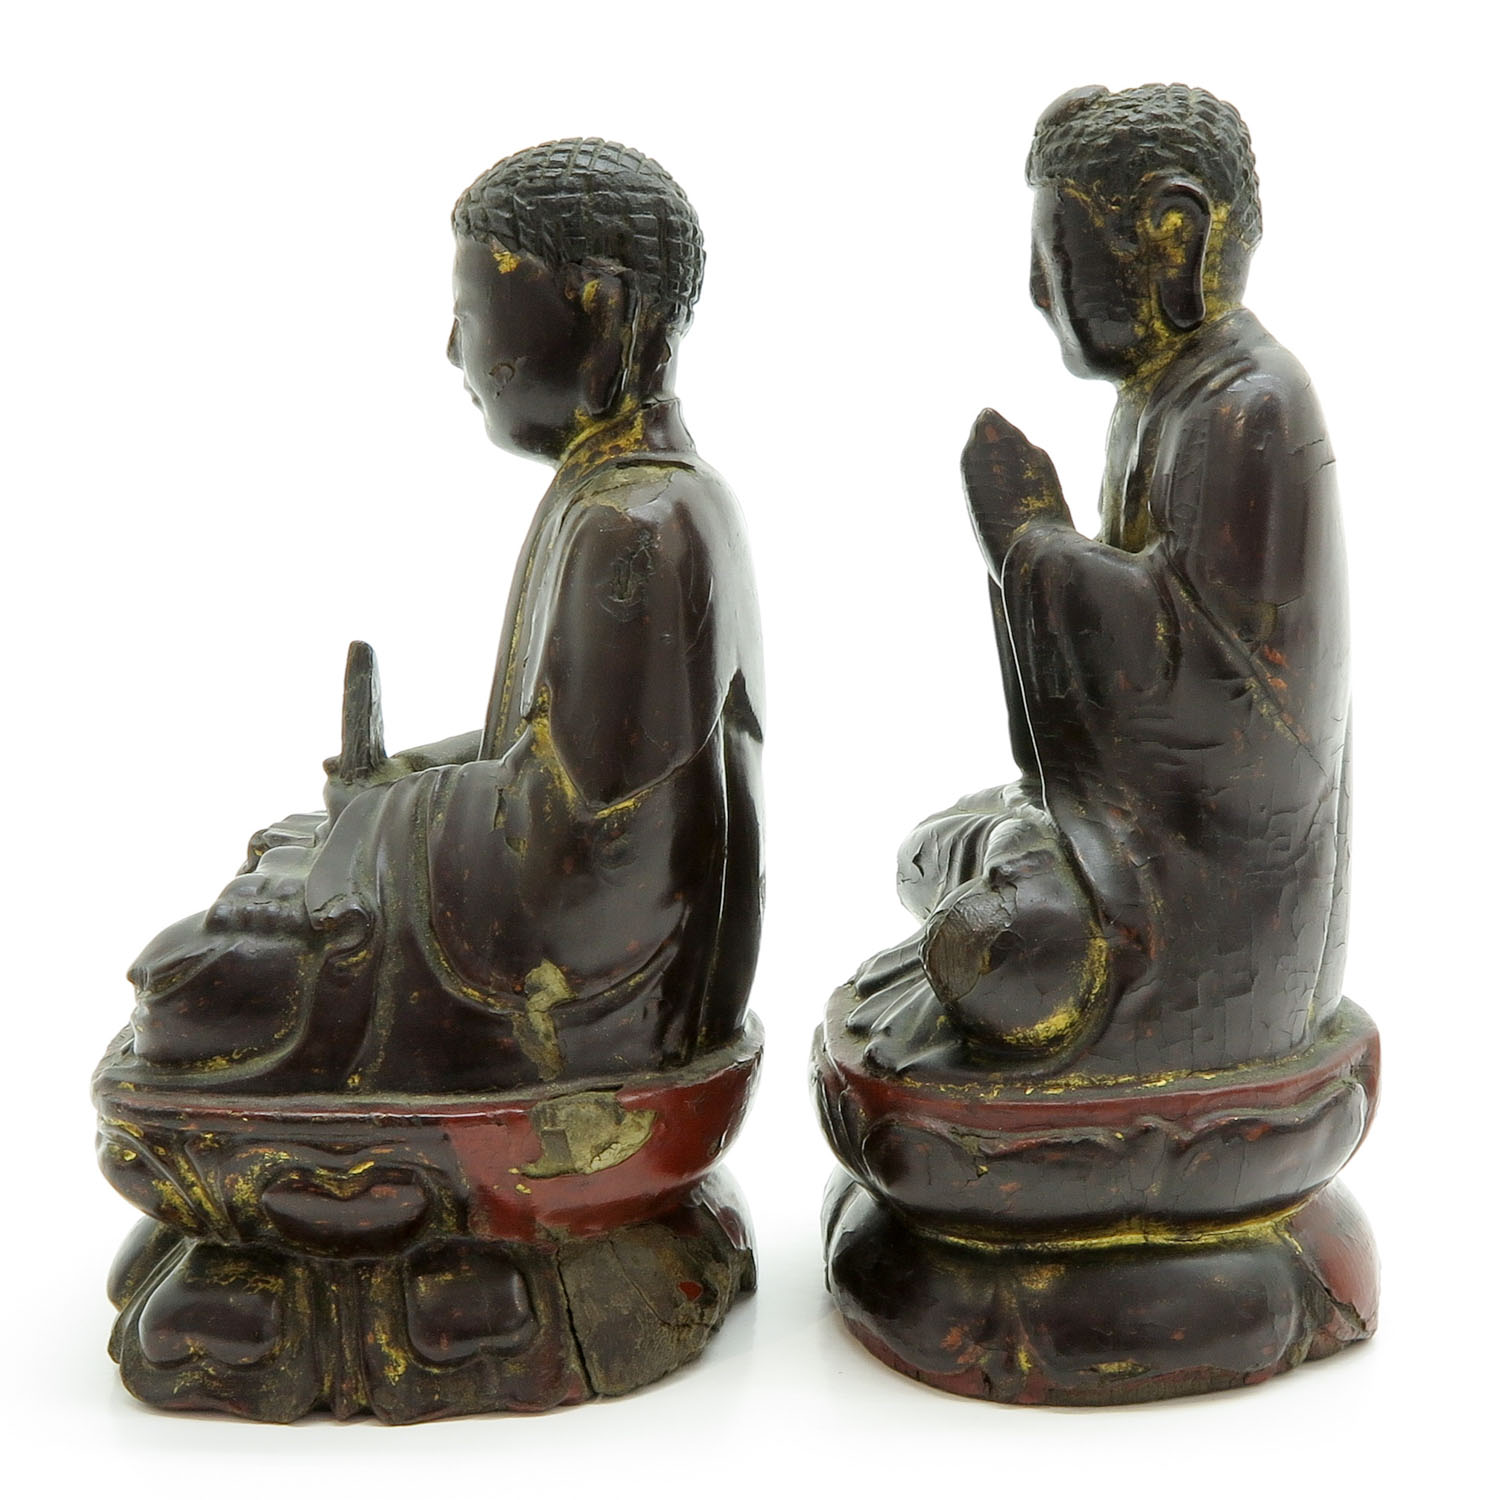 Lot of 2 Carved Wood Chinese Sculptures - Image 2 of 5